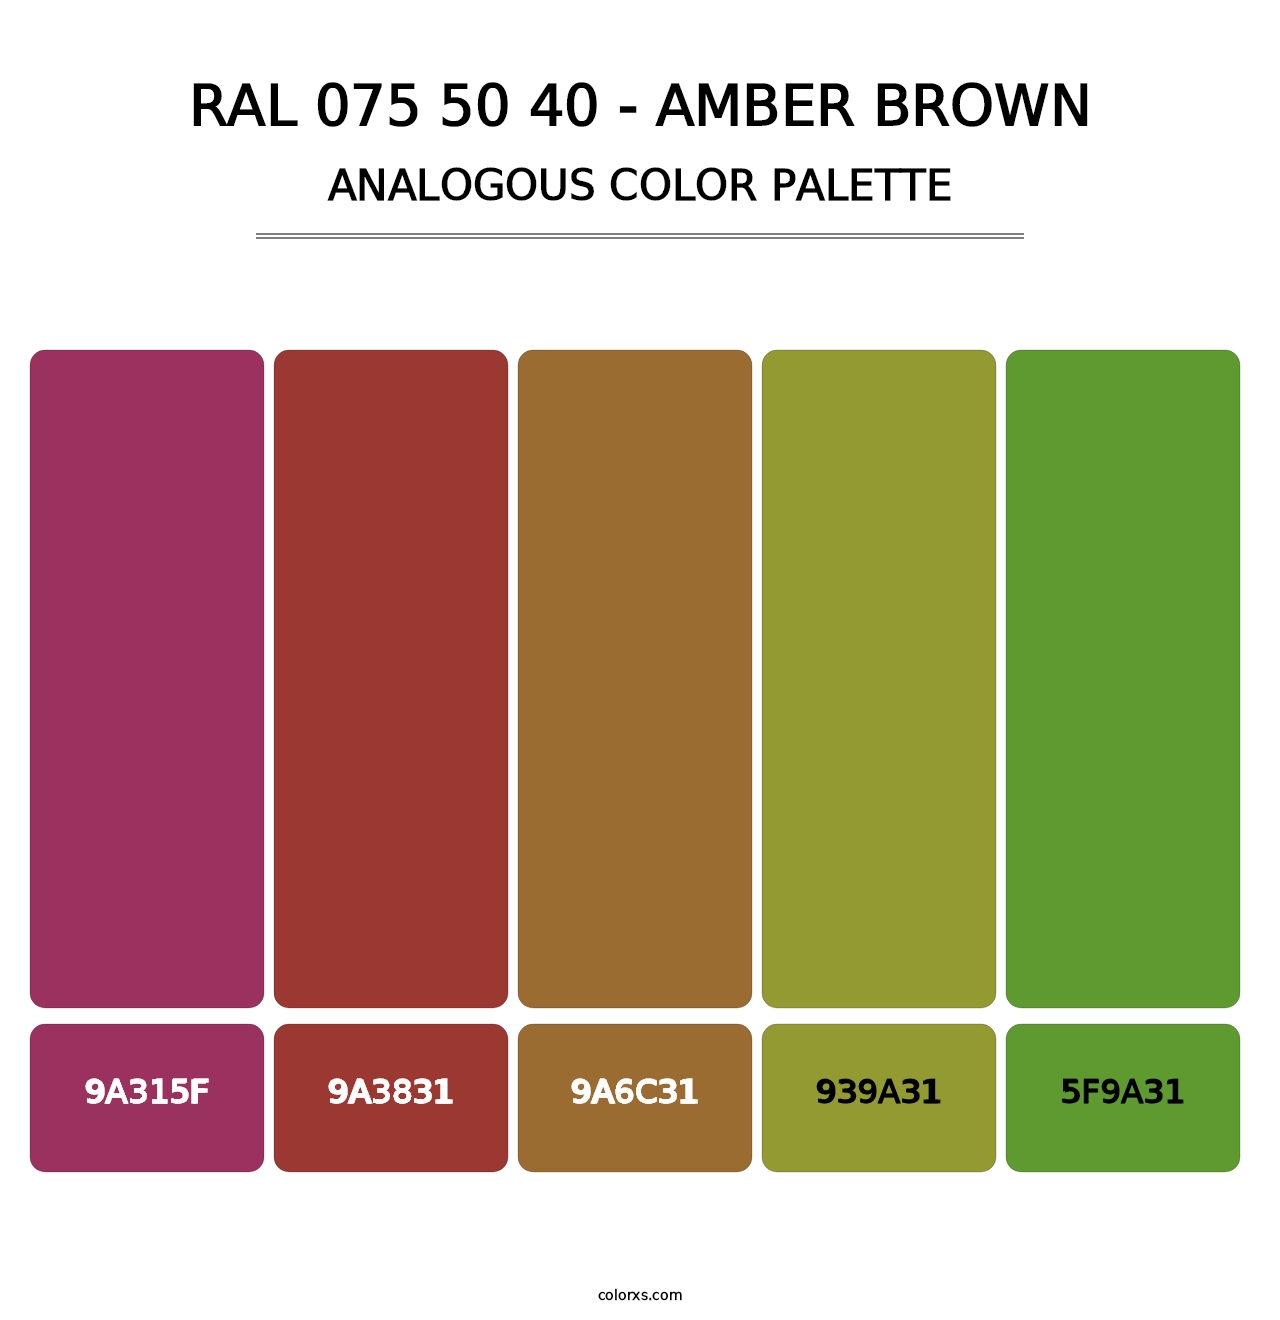 RAL 075 50 40 - Amber Brown - Analogous Color Palette